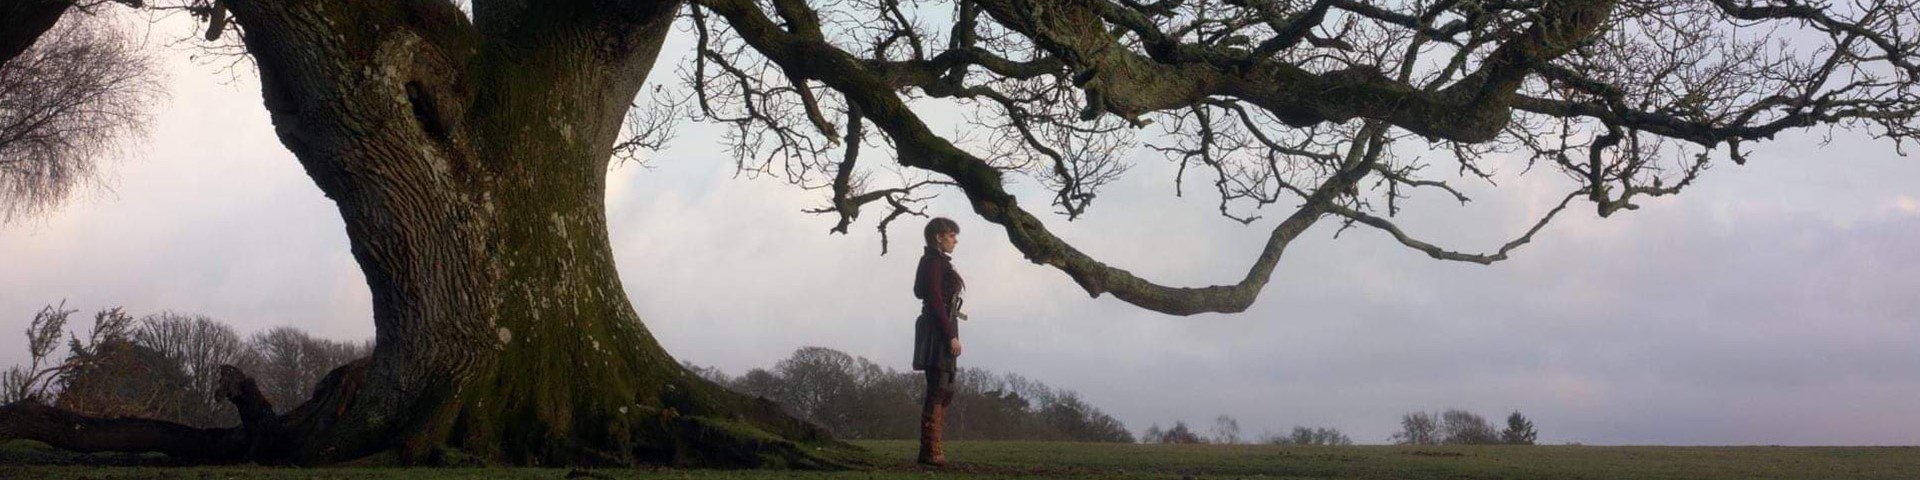 A still from Oathbreaker of a person standing under a tree